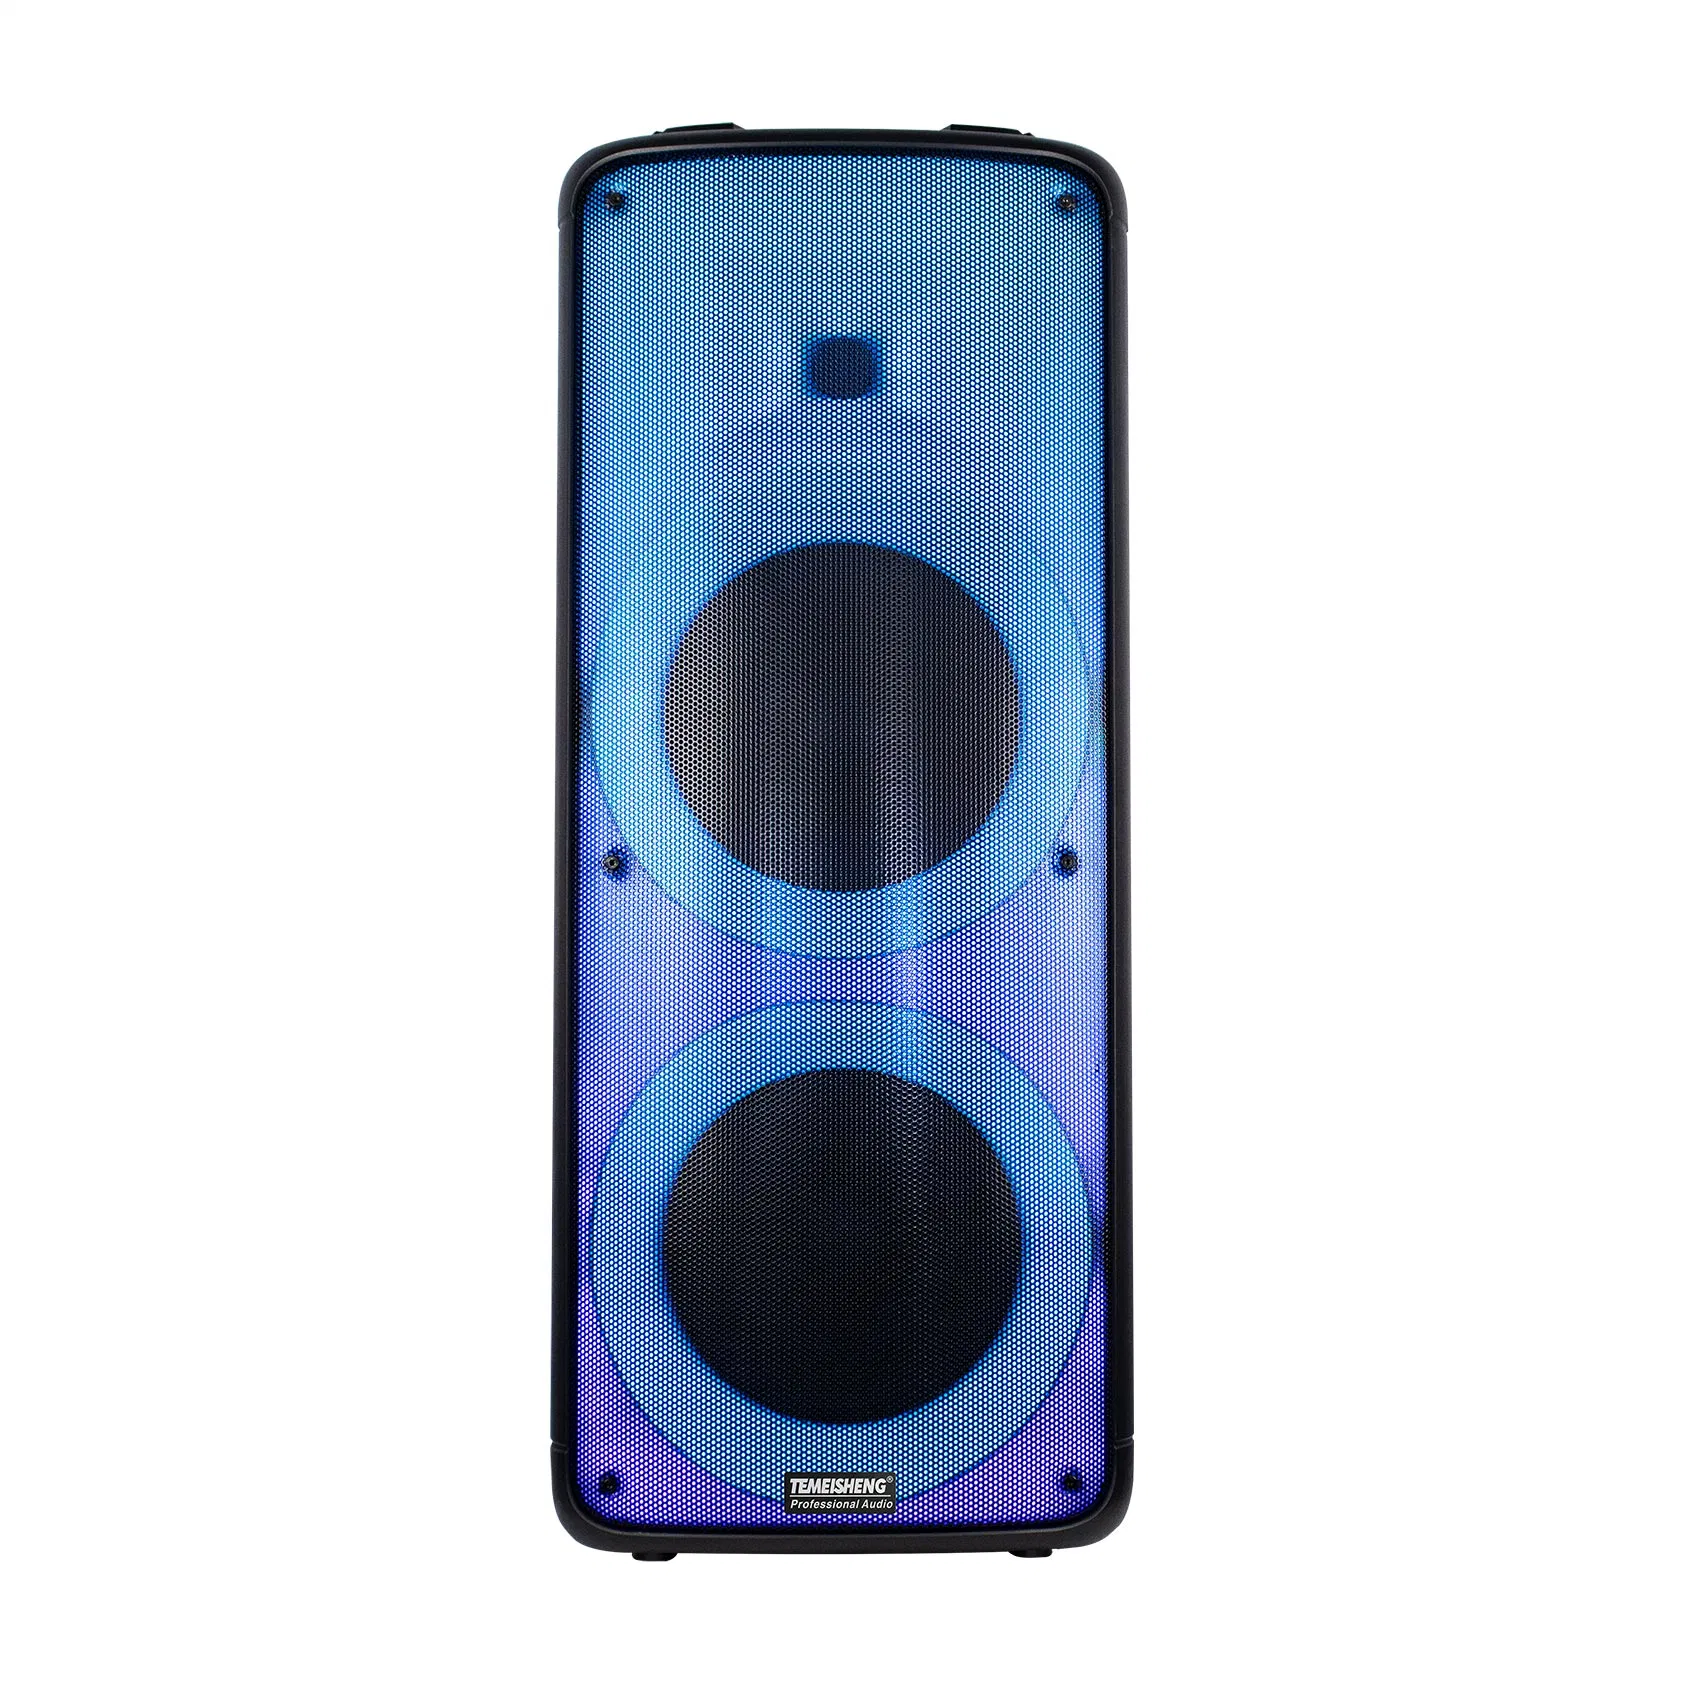 Fire Light Dual 10inch Party Bluetooth Speaker 5.0 Vox